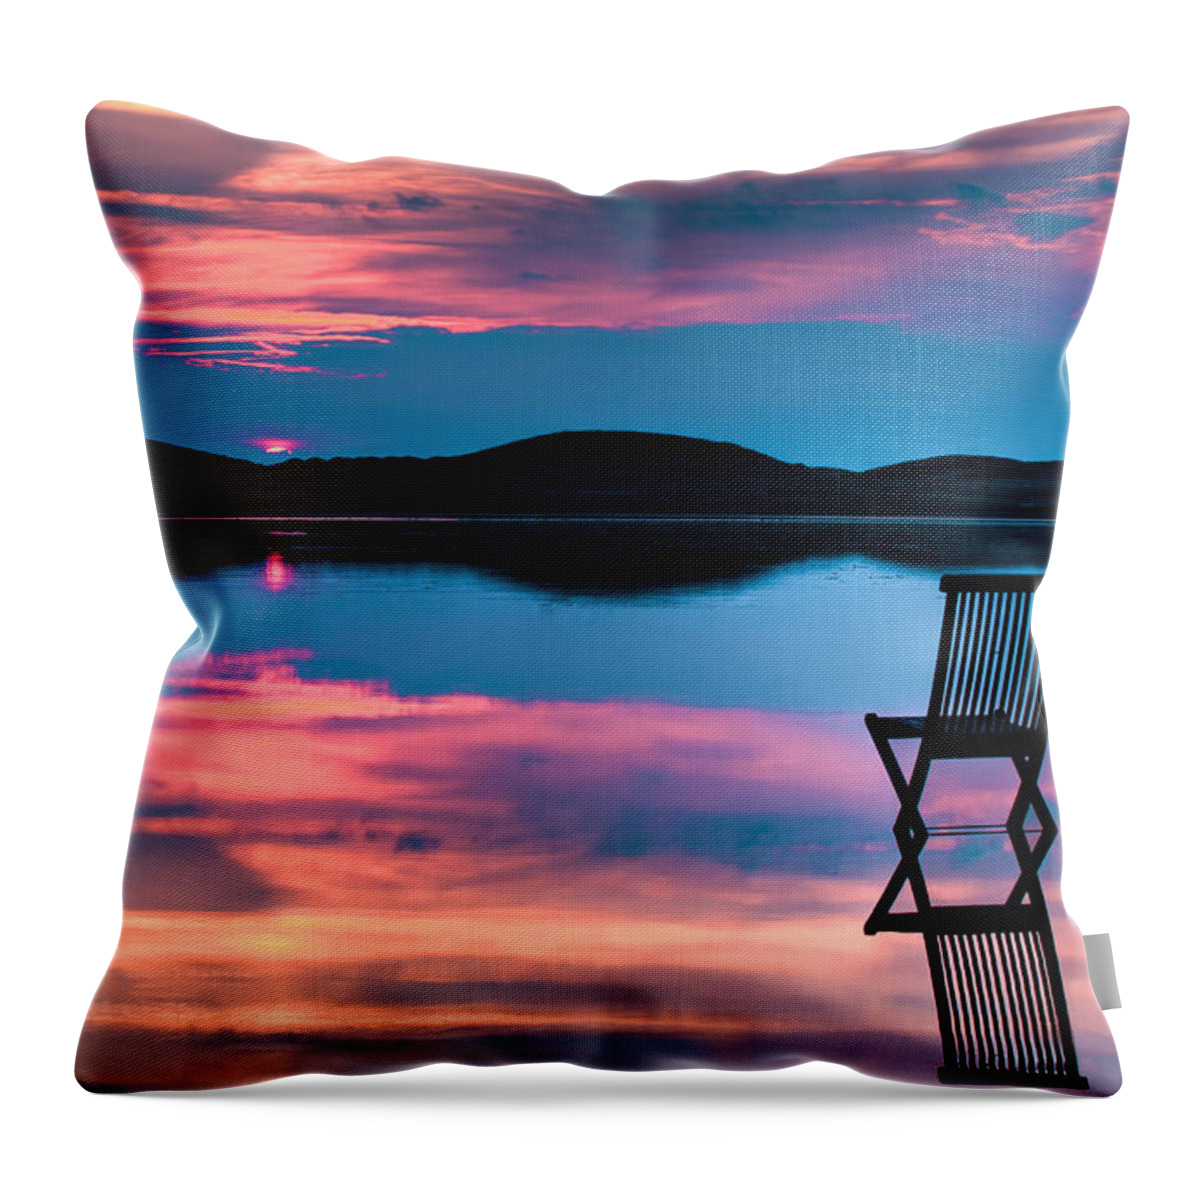 Background Throw Pillow featuring the photograph Surreal Sunset by Gert Lavsen